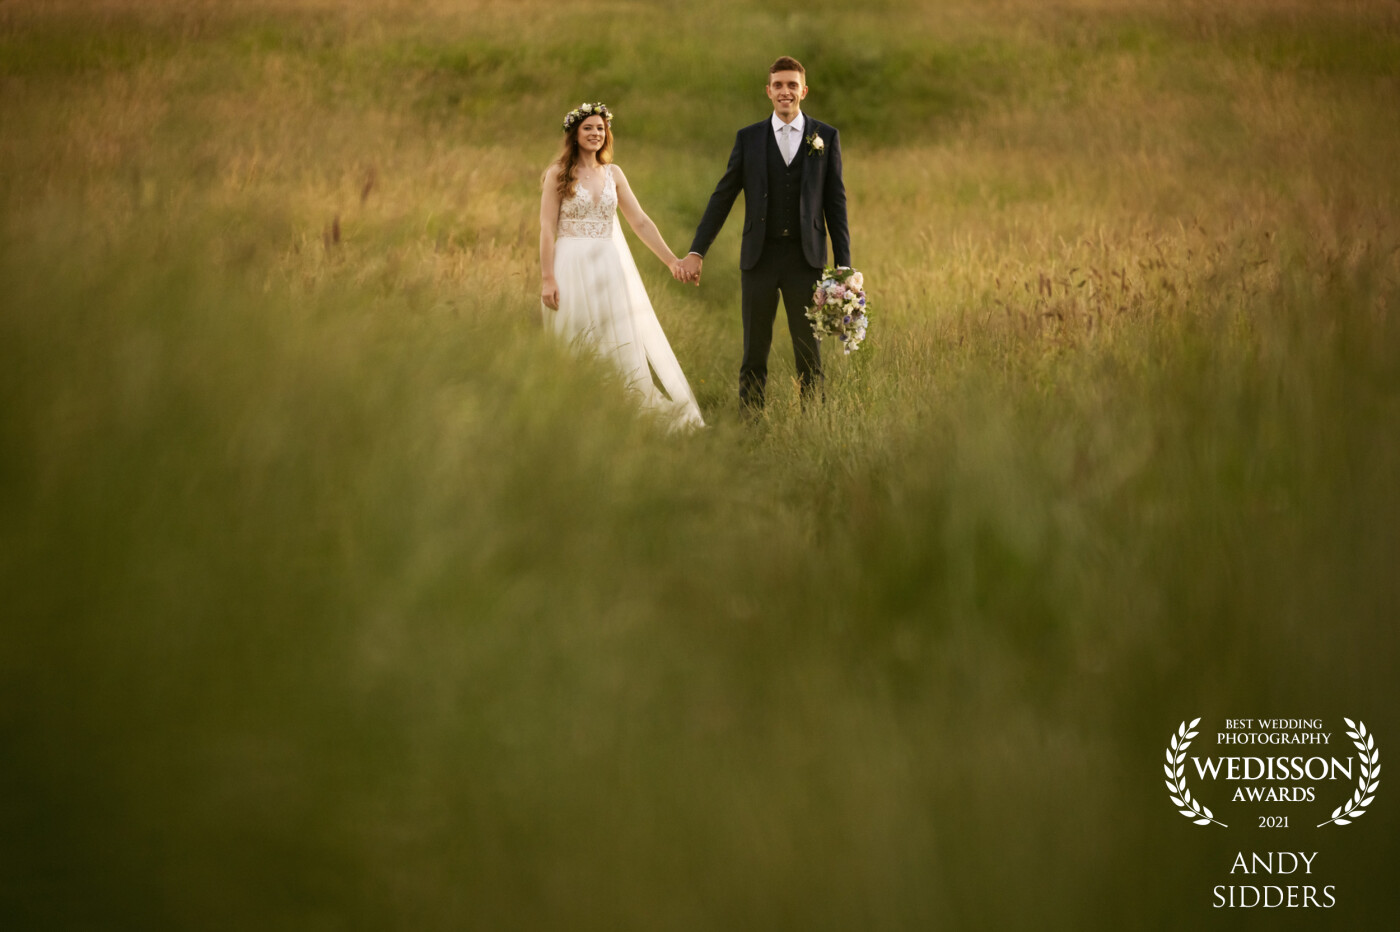 The bride and groom were absolute superstars! We took a stroll into a field with long grass and were blessed with beautiful evening light.<br />
<br />
Captured at a wedding at The Five Arrows Hotel, Waddesdon Manor.